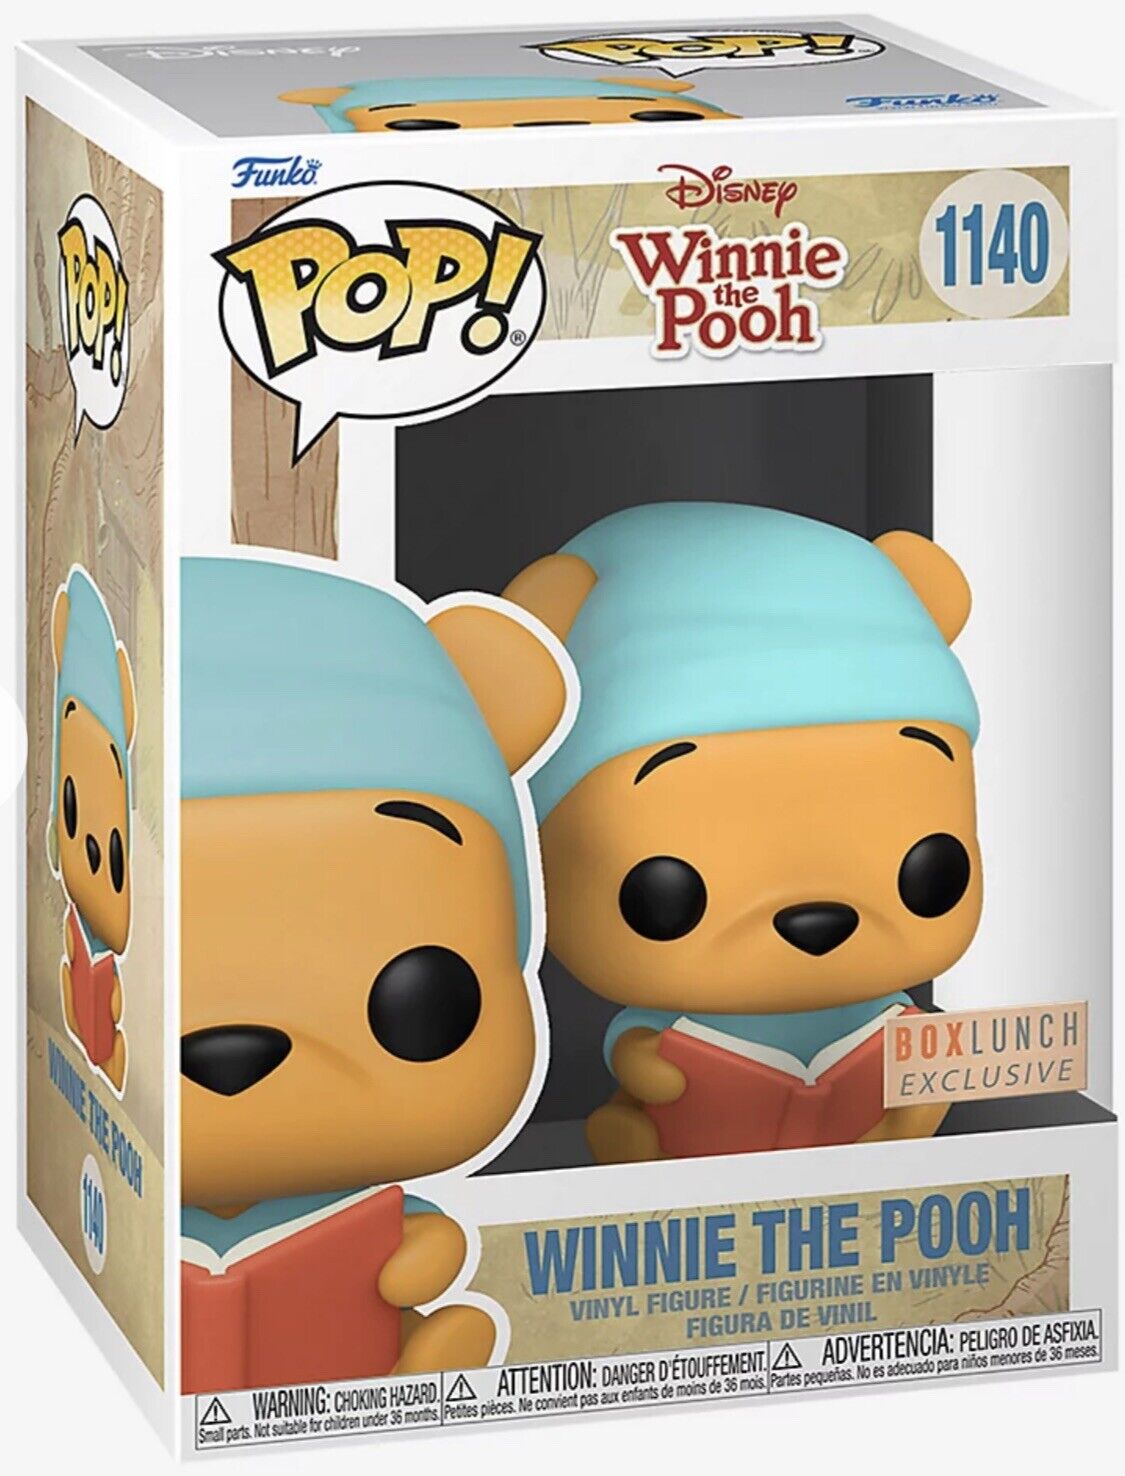 FUNKO POP WINNIE THE POOH READING BOOK #1140 NEW BOX EXCLUSIVE HONEY NIGHT GOWN